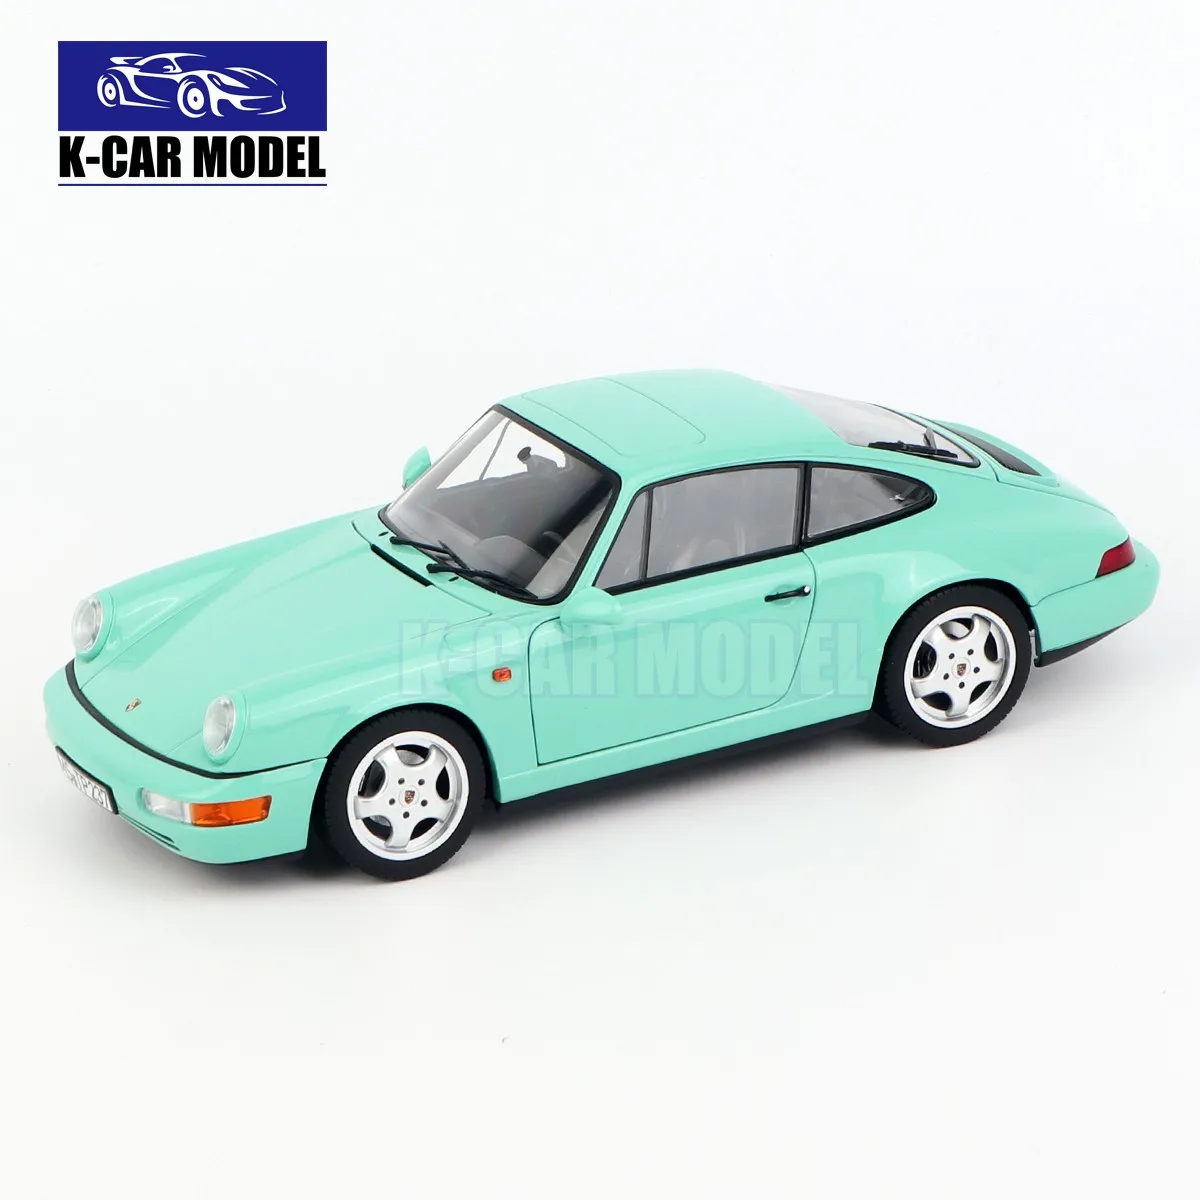 Nover 1/18 911 964 Carrera 2 1992 Mint Green Diecast Model Toy Cars Gifts For Father Friend